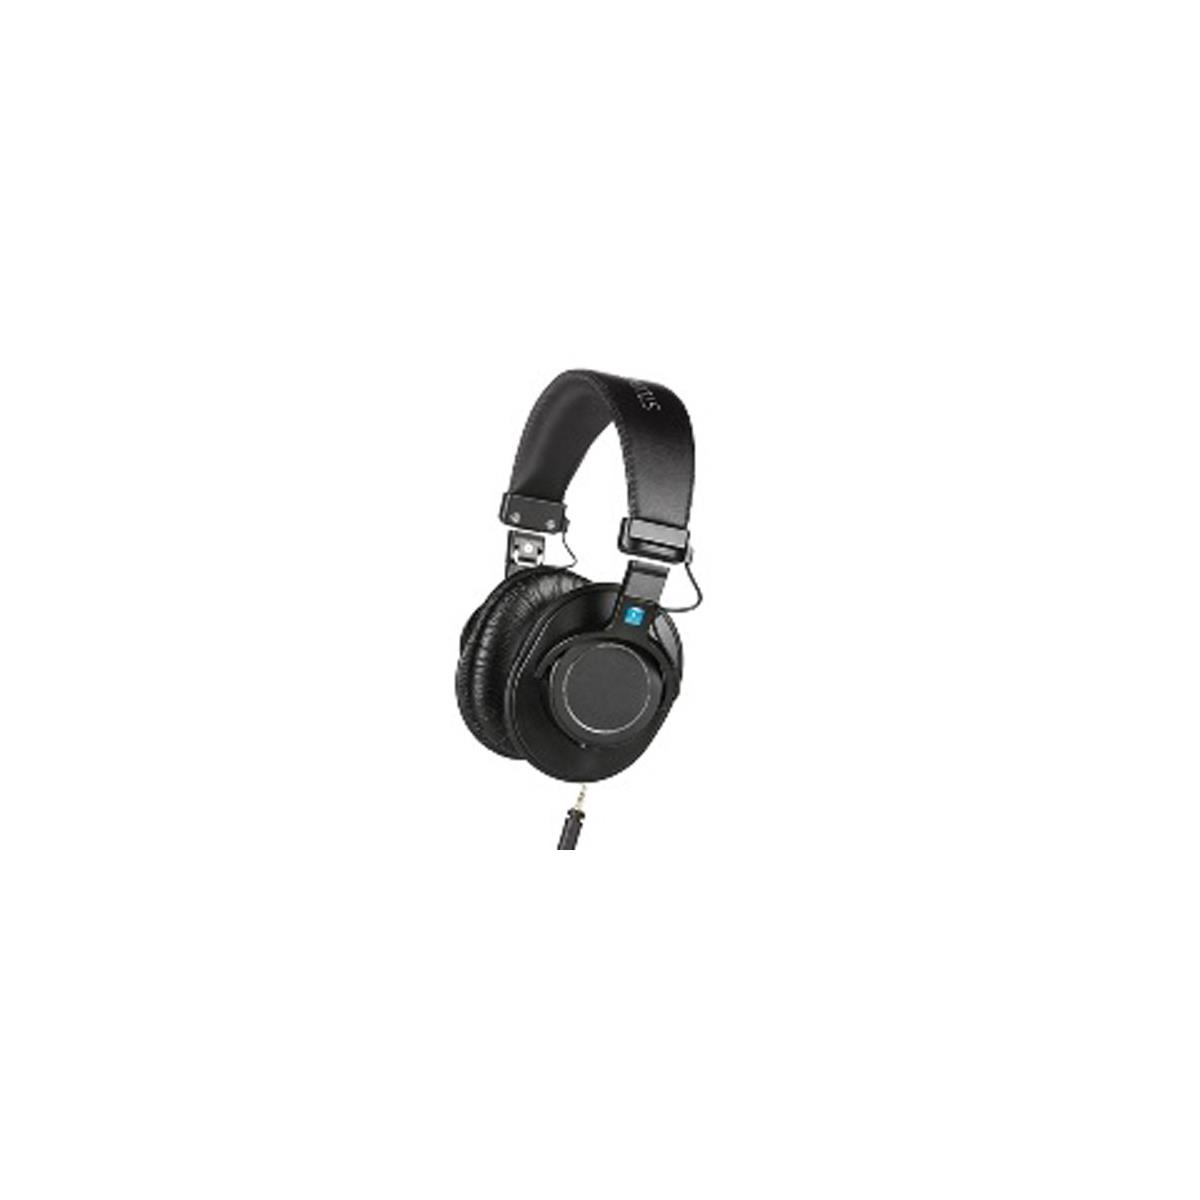 Image of Apex HP100 Closed Folding Dynamic Studio Headphones with Detachable Cable